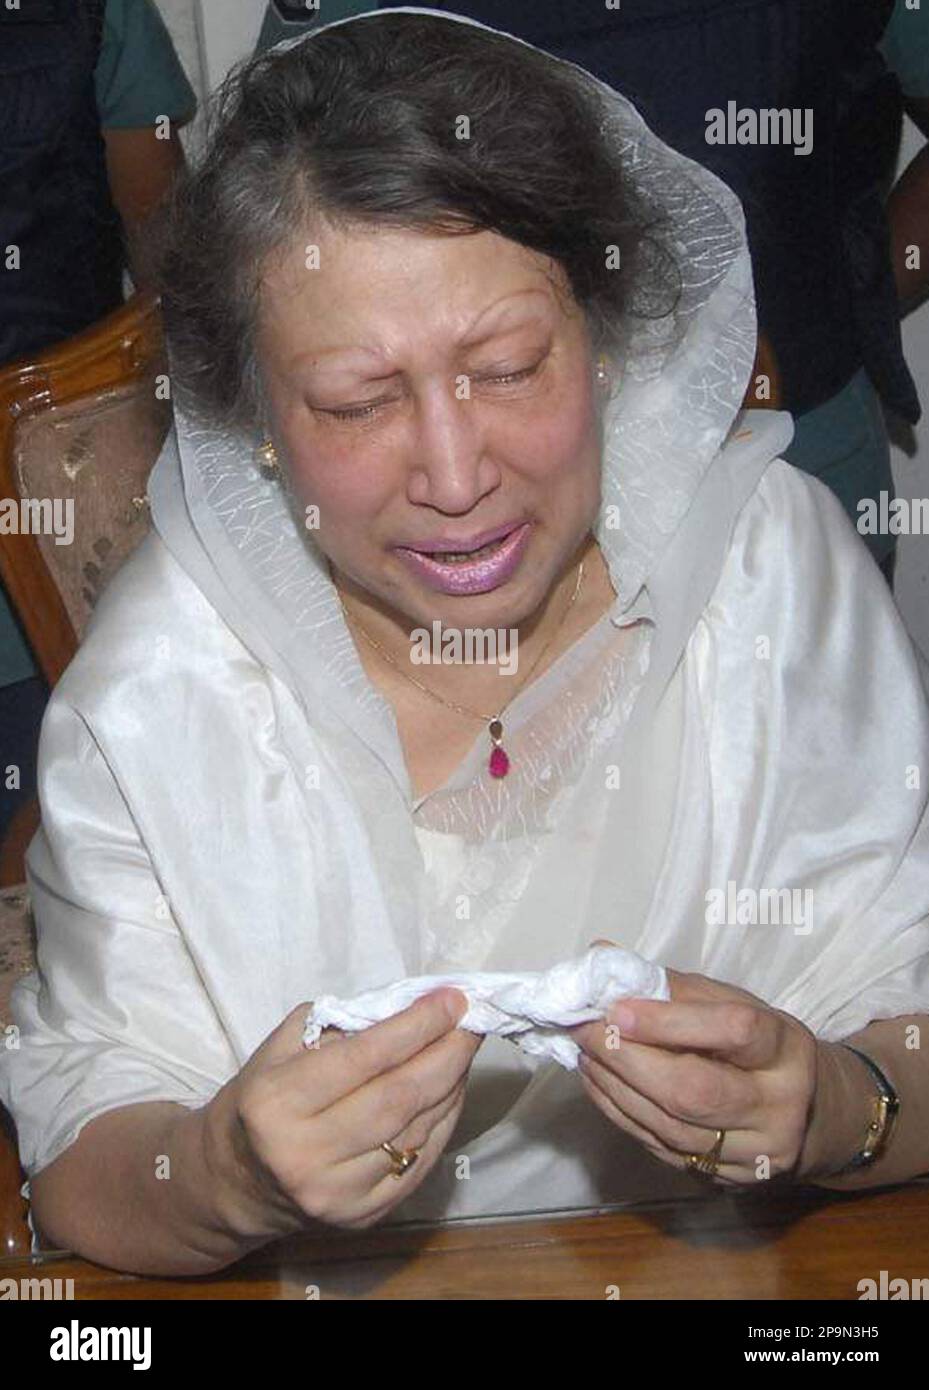 Bangladesh Nationalist Party (BNP) leader and former Prime Minister Khaleda Zia cries during a press conference in Dhaka, Bangladesh, Thursday, Sept. 11, 2008. Bangladesh's military-backed government released Zia Thursday from jail after she received bail pending trial on corruption charges. (AP Photo/Pavel Rahman) Stock Photo